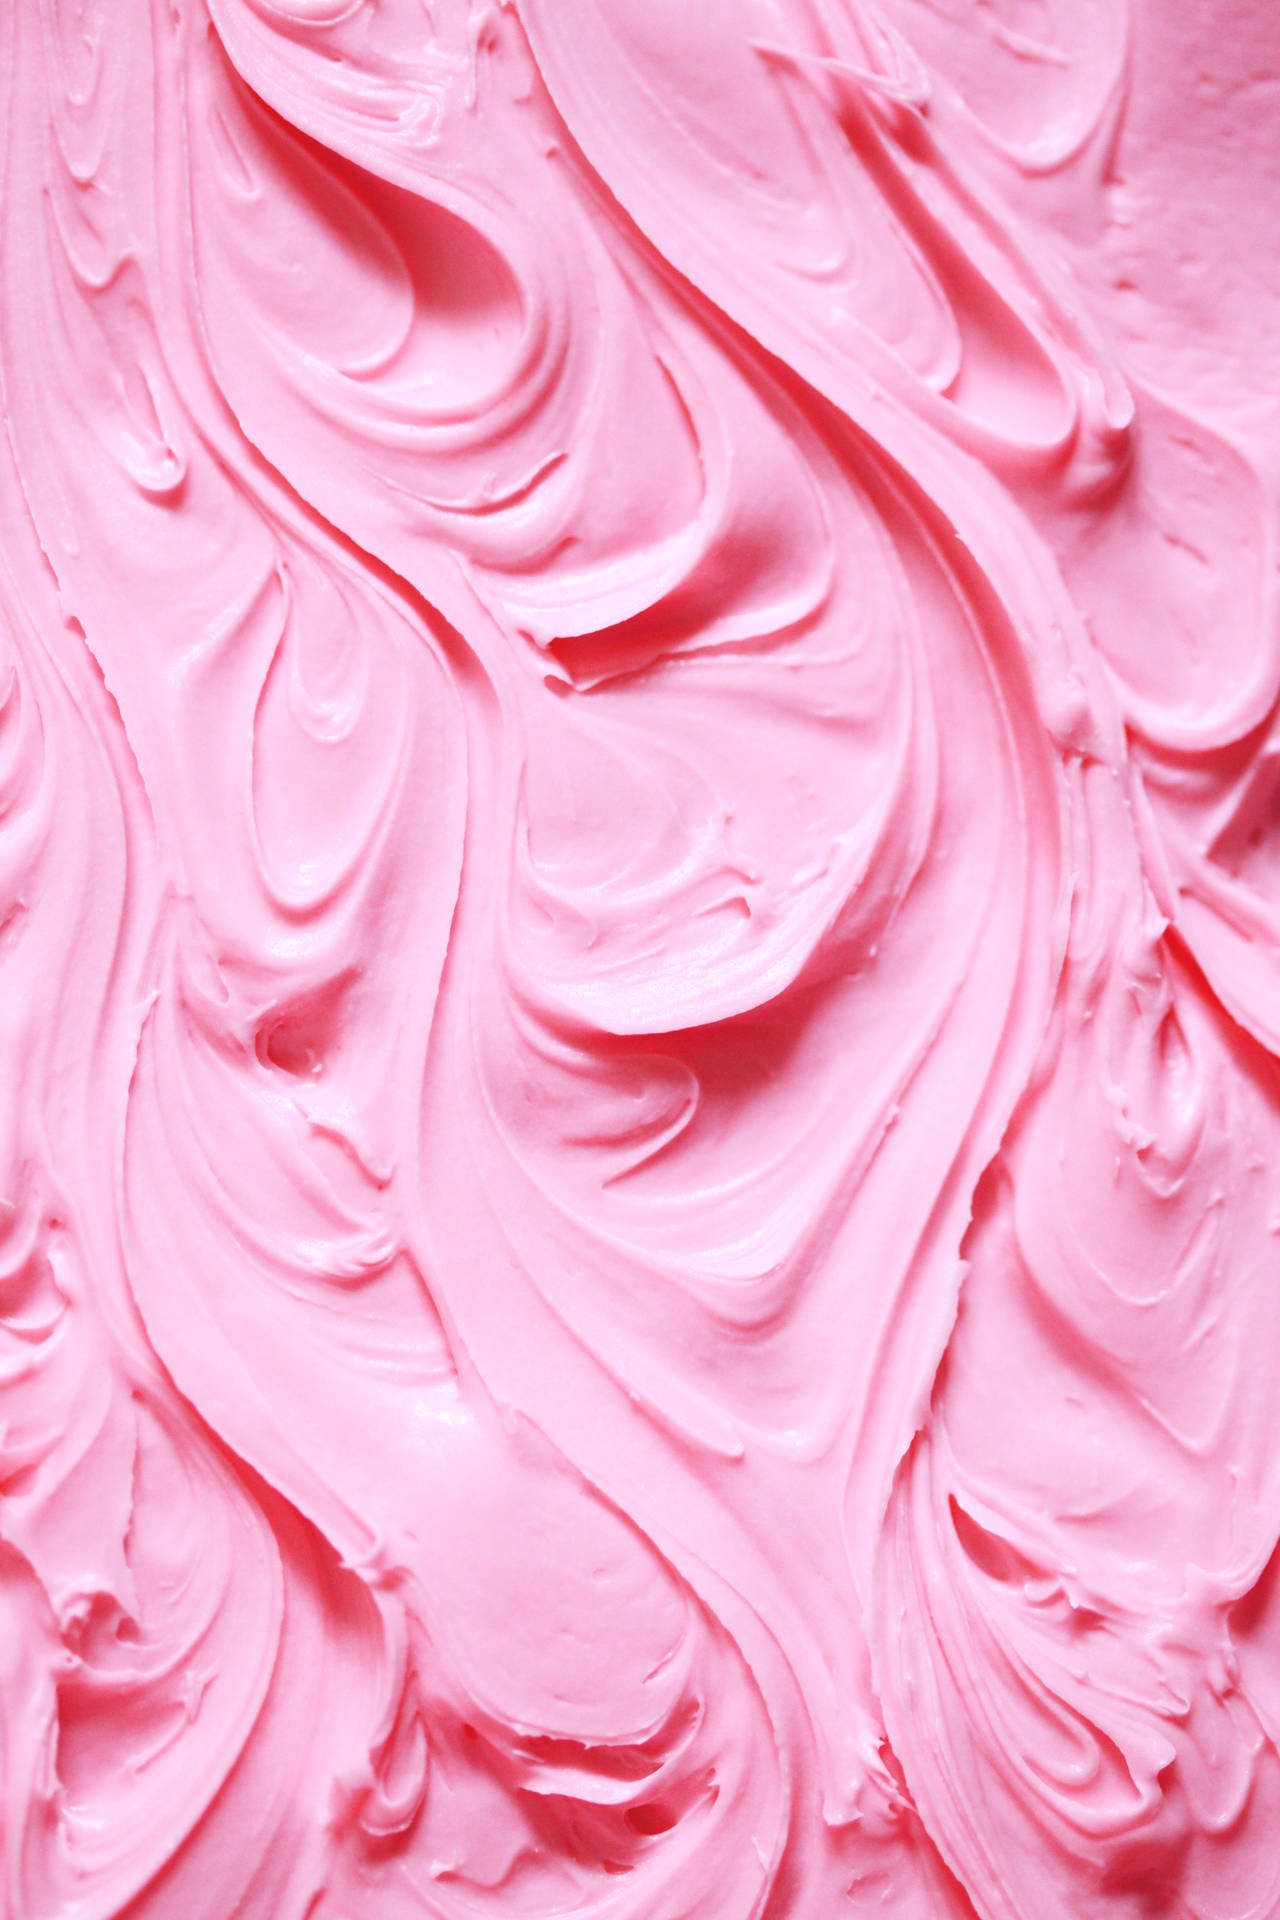 Brighten Your Day with a Gorgeous Pink&White Palette Wallpaper